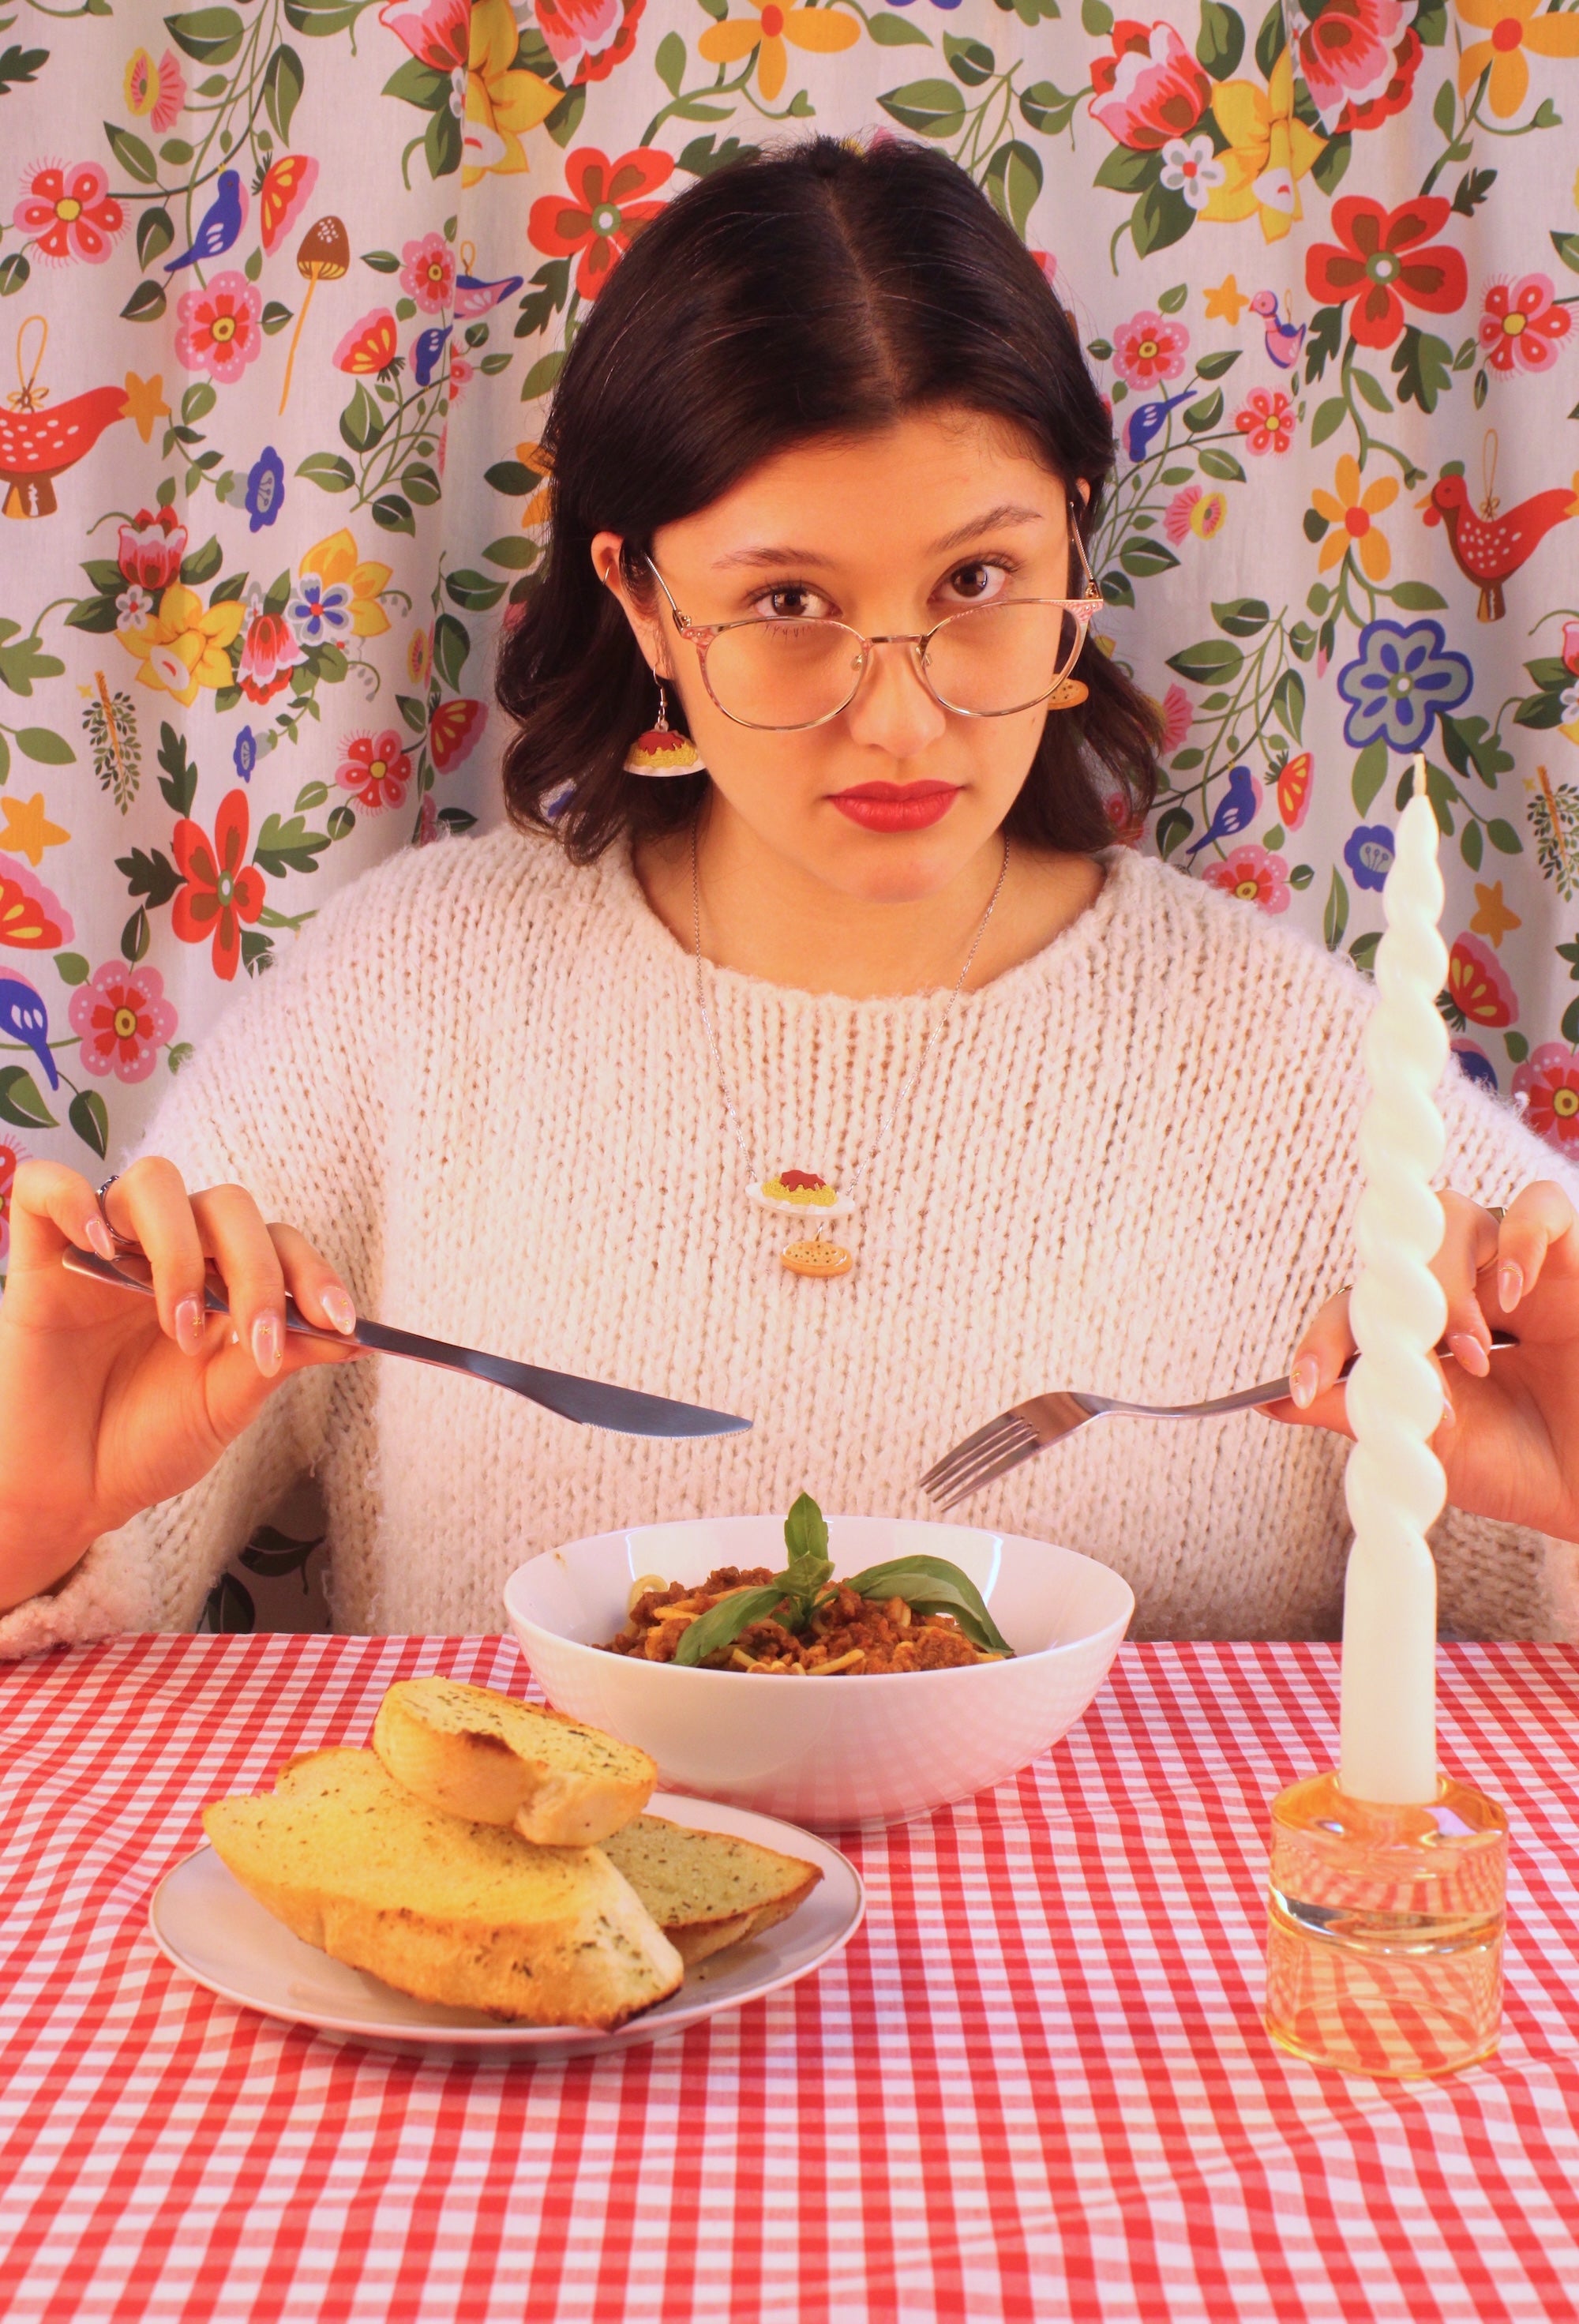 A woman eating spaghetti bolognese wearing spag bol earrings and necklace